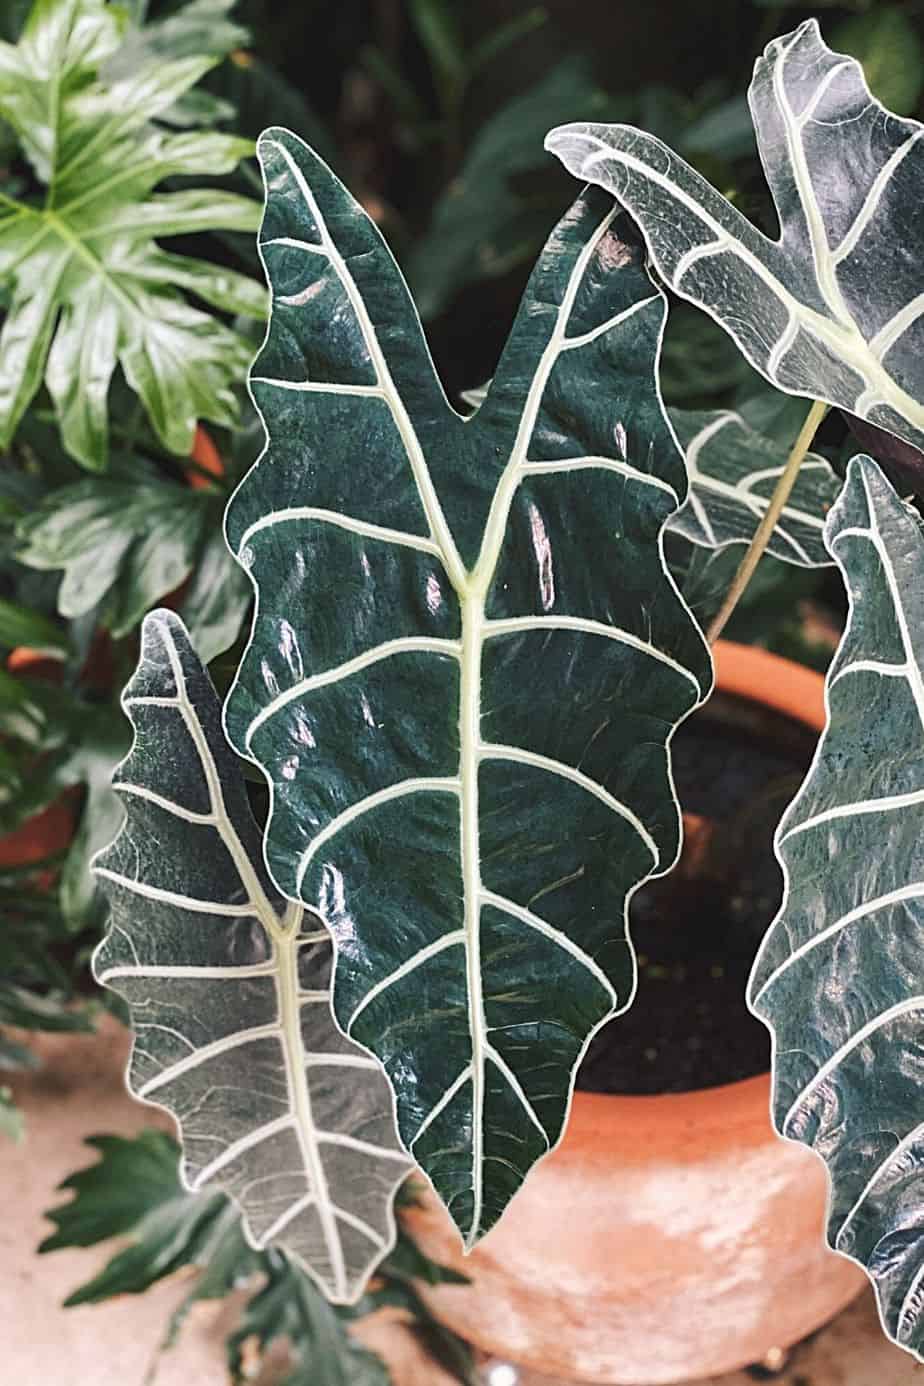 When ingested by cats, Alocasia can cause their mouth, lips, and tongue to burn